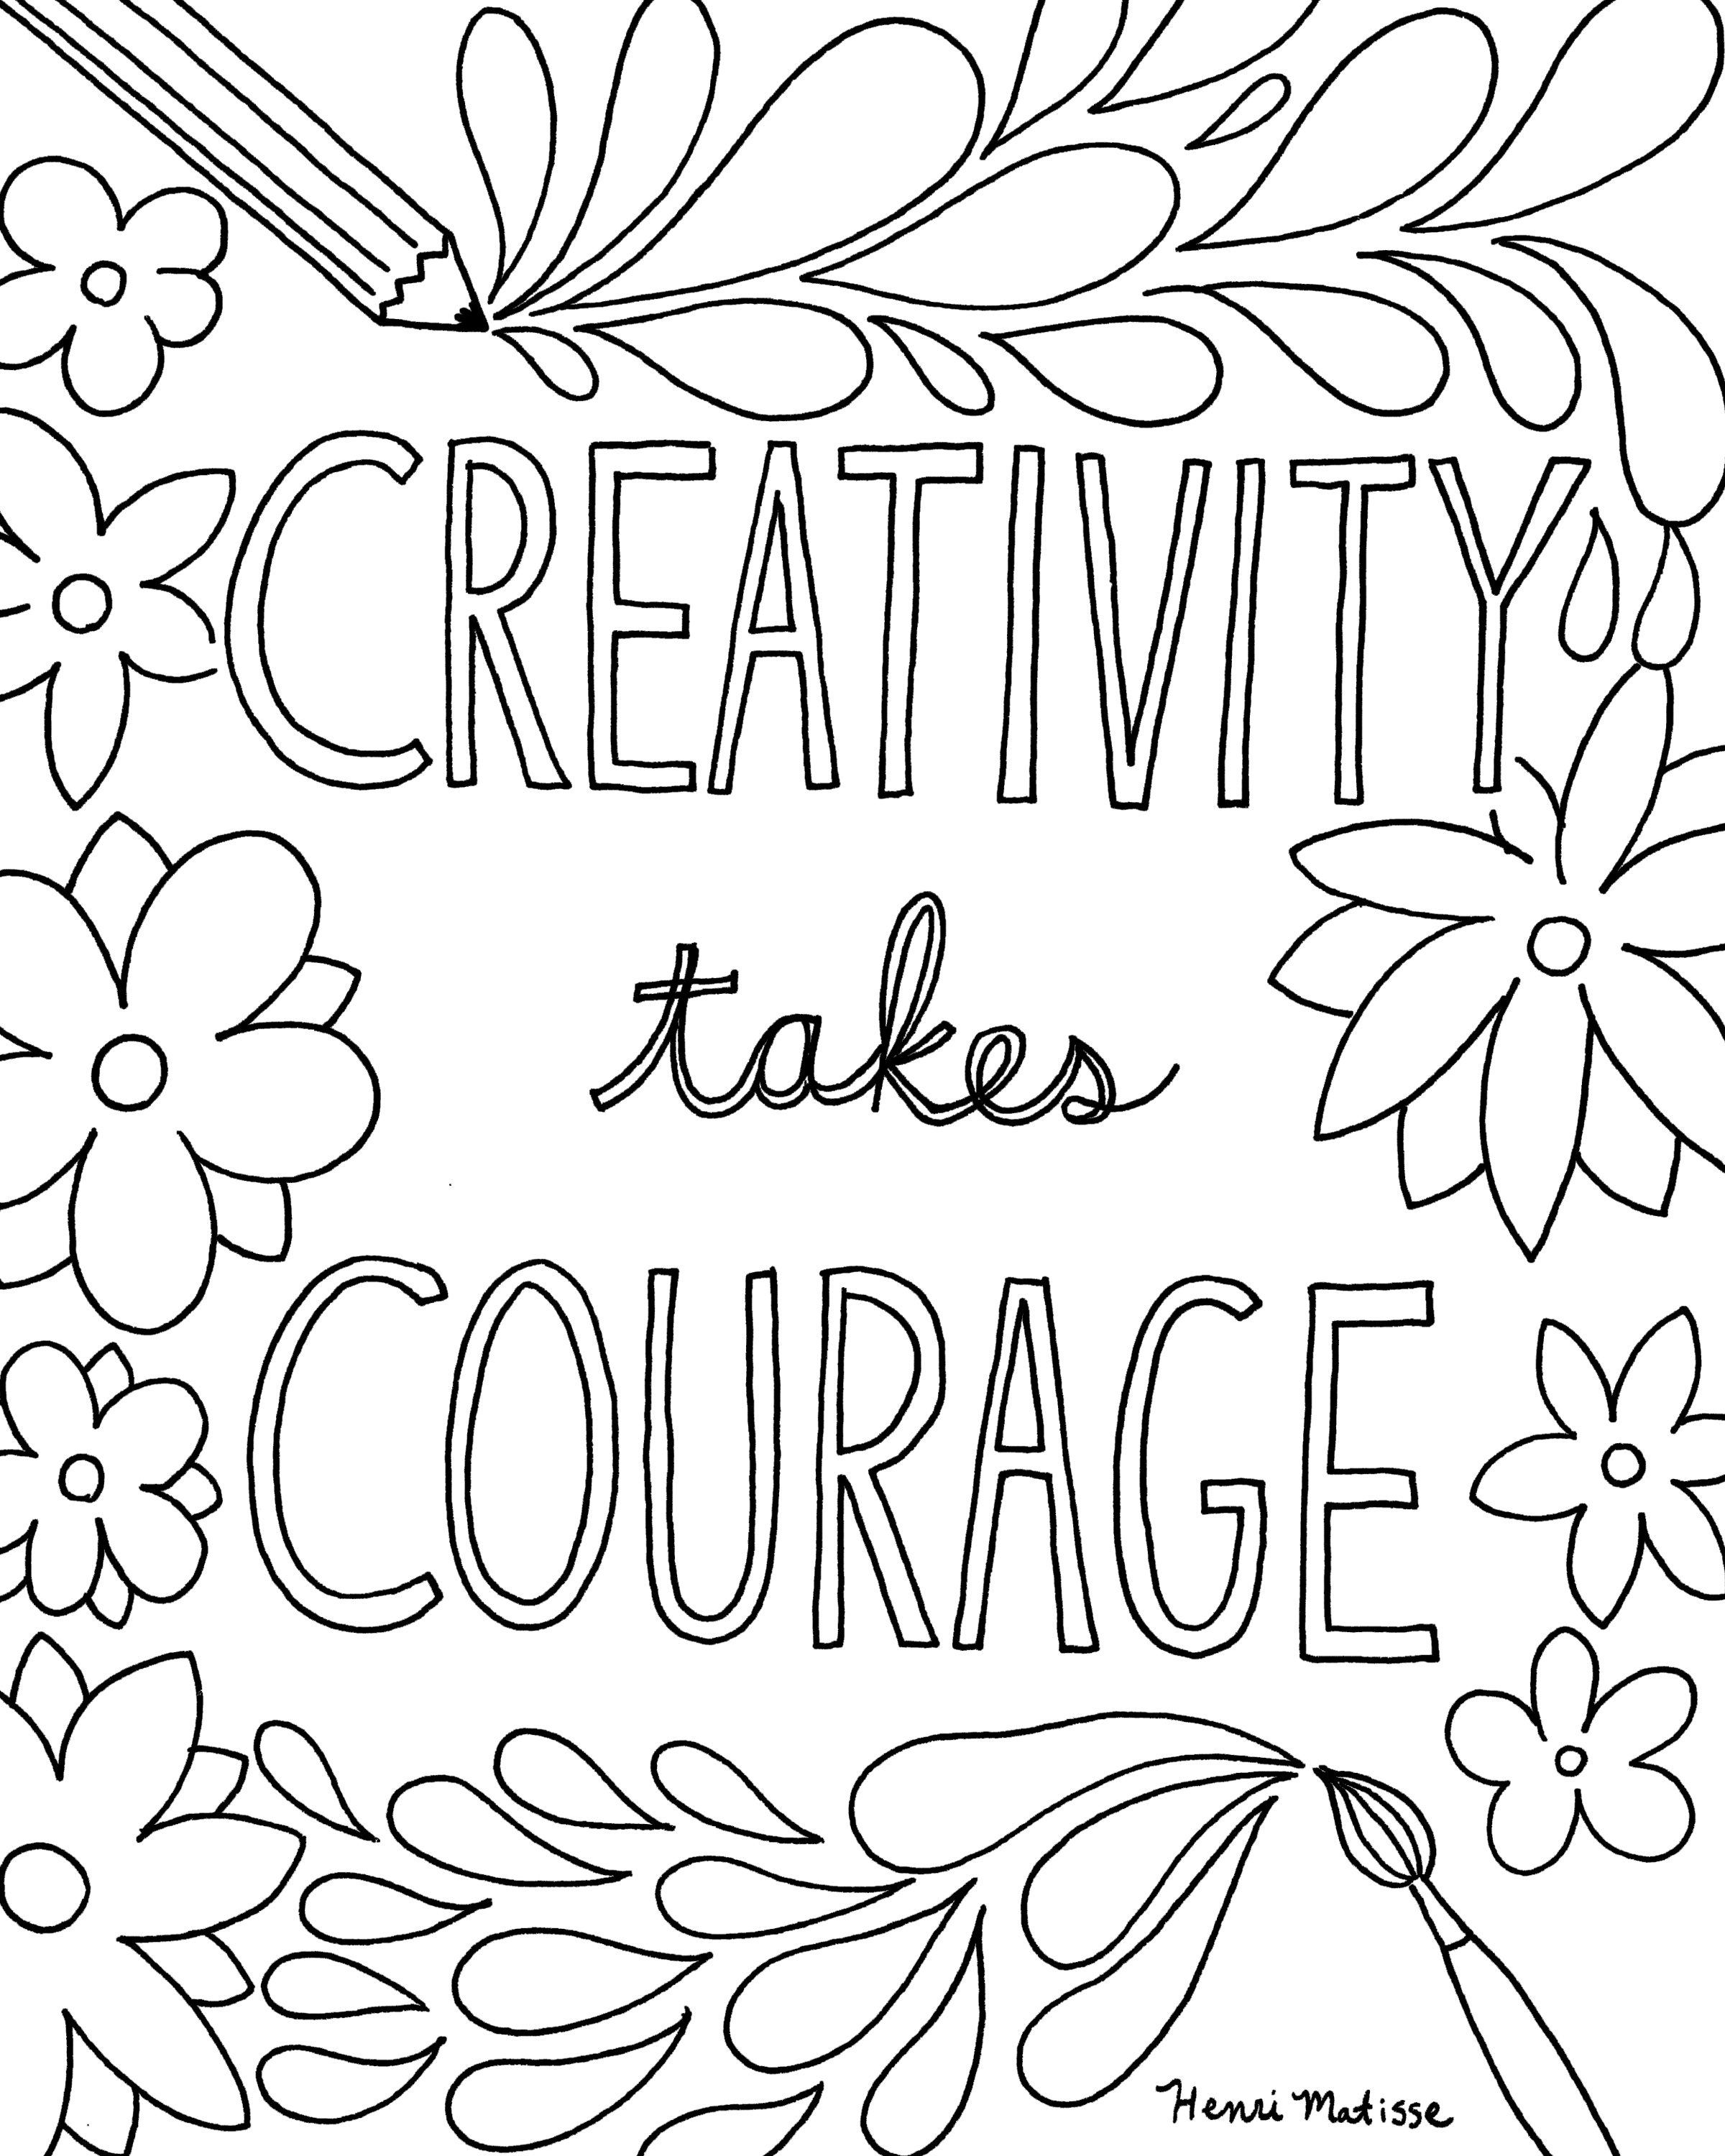 Quote coloring pages for adults and teens